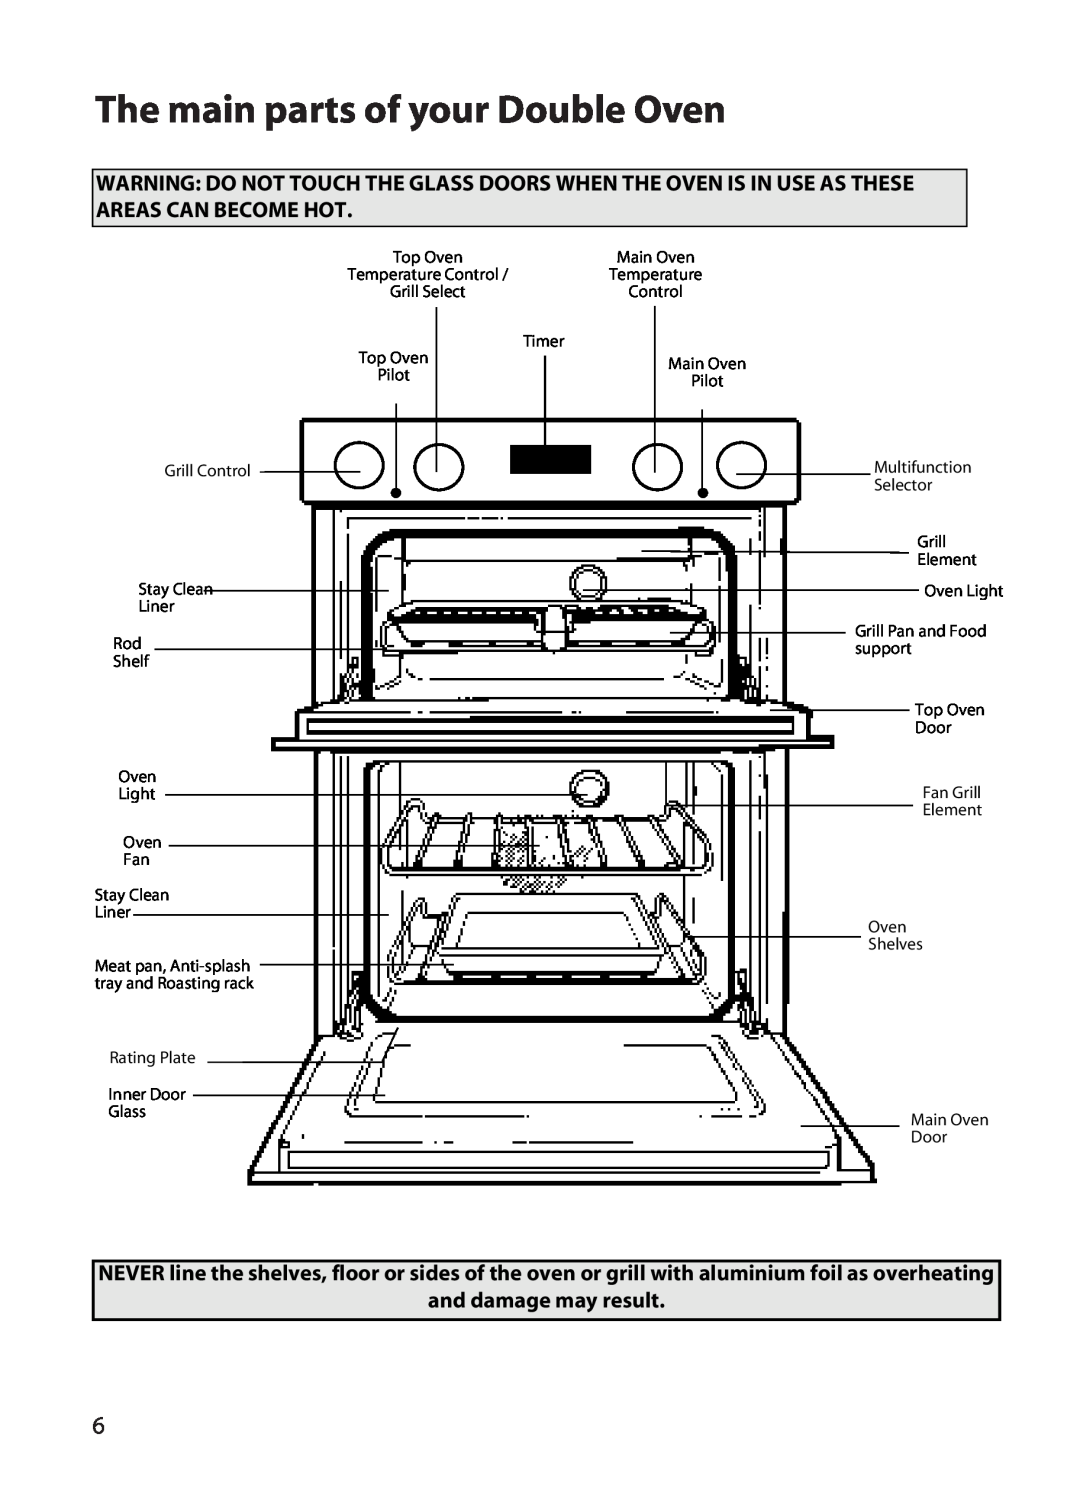 Hotpoint DD77 DT77 manual The main parts of your Double Oven, and damage may result 